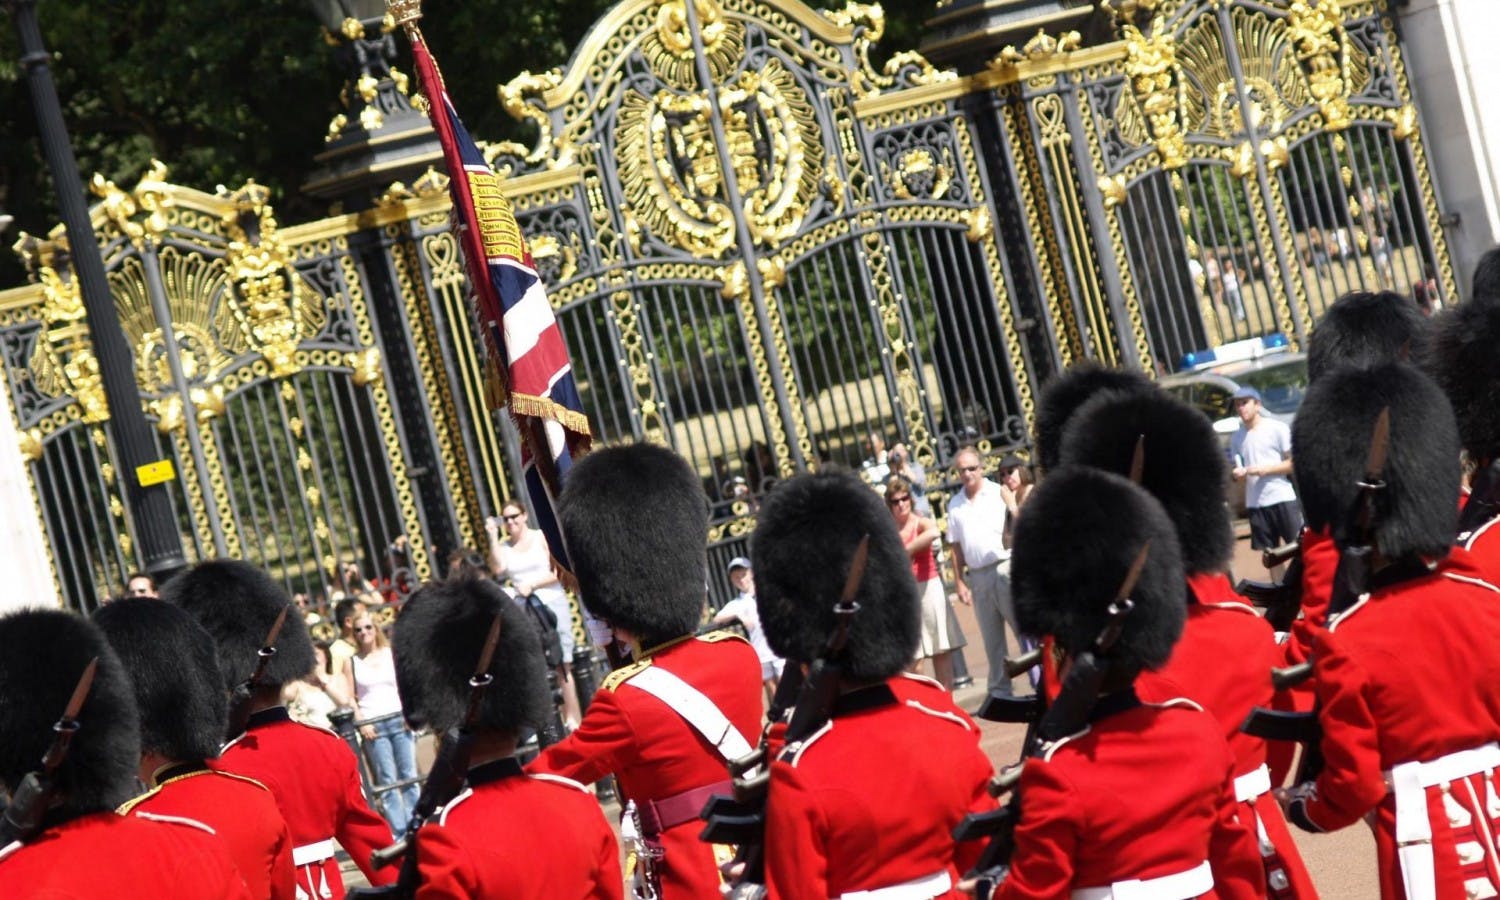 london bus tour - changing of the guard - gate.jpg